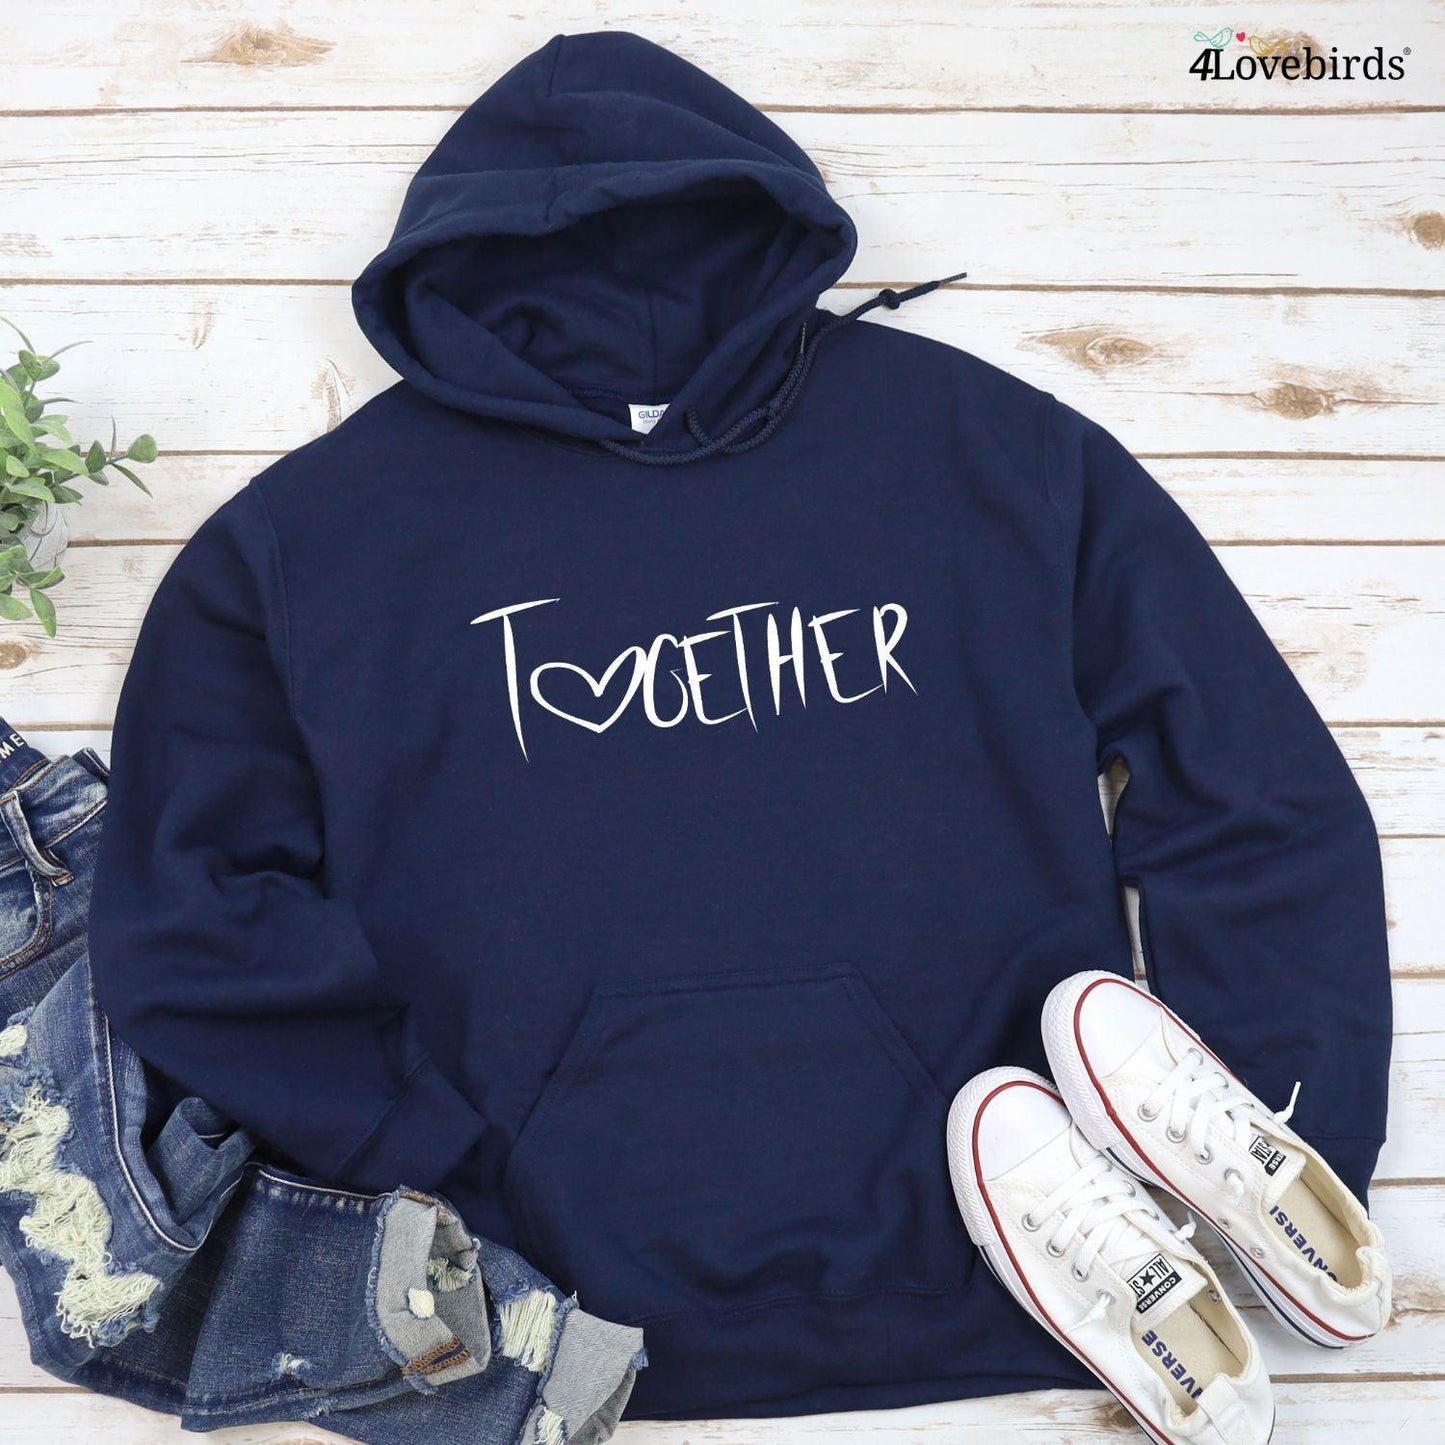 Matching Set: Together Forever Hoodies, Sweatshirts, Shirts, Longsleeves, Anniversary Tops - 4Lovebirds